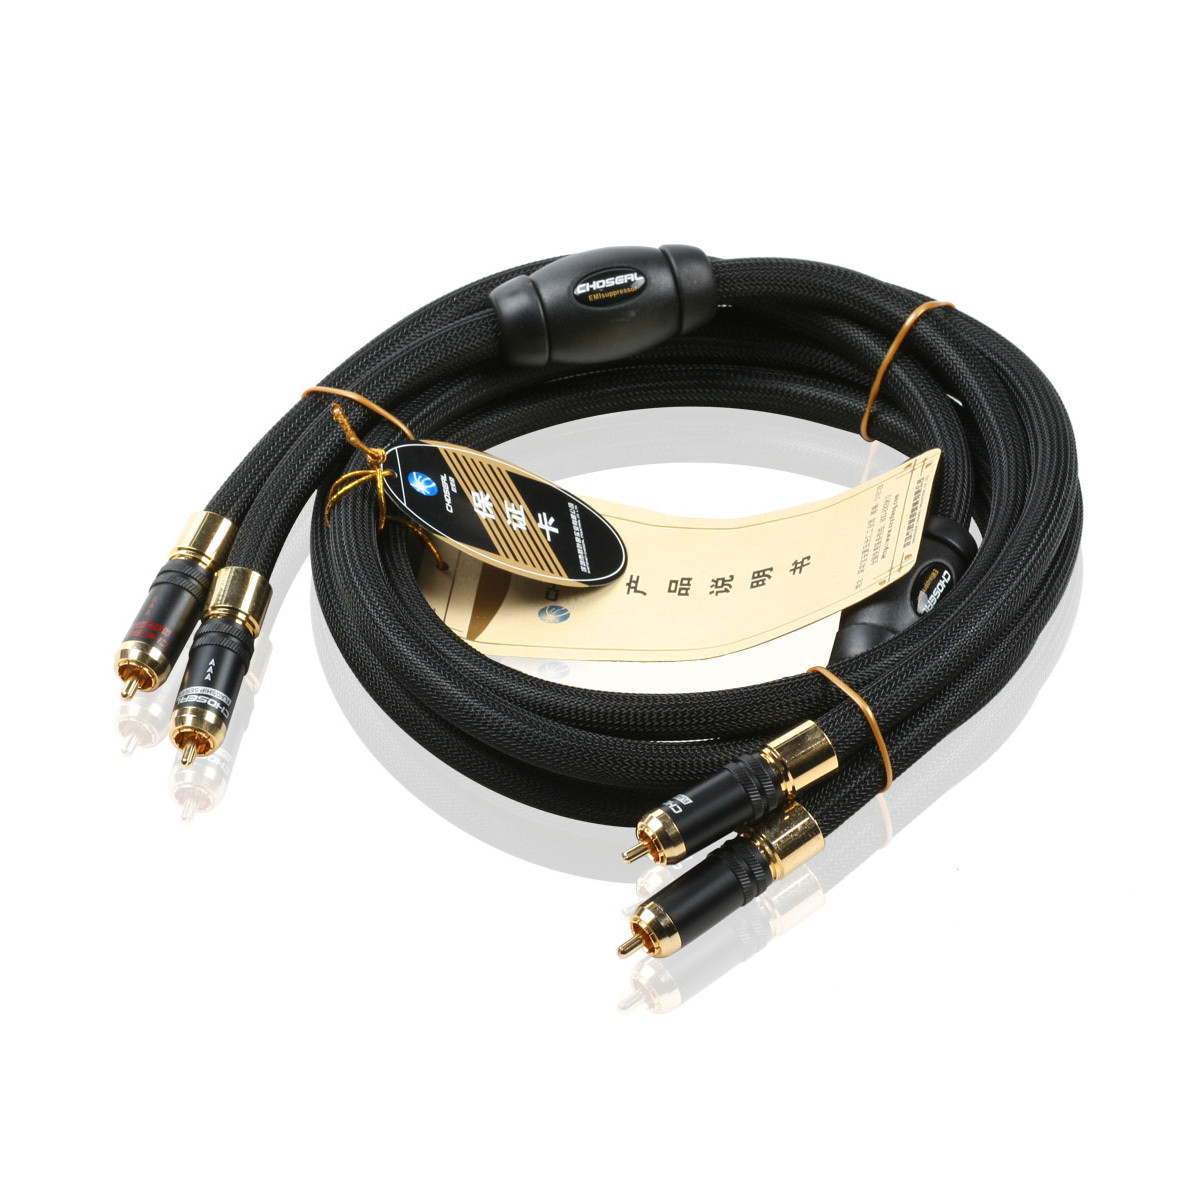 Choseal AB-5408 Audiophile Audio Cable 1.5M 6N OCC 24K gold-plated Digital Coaxial Cable Pair